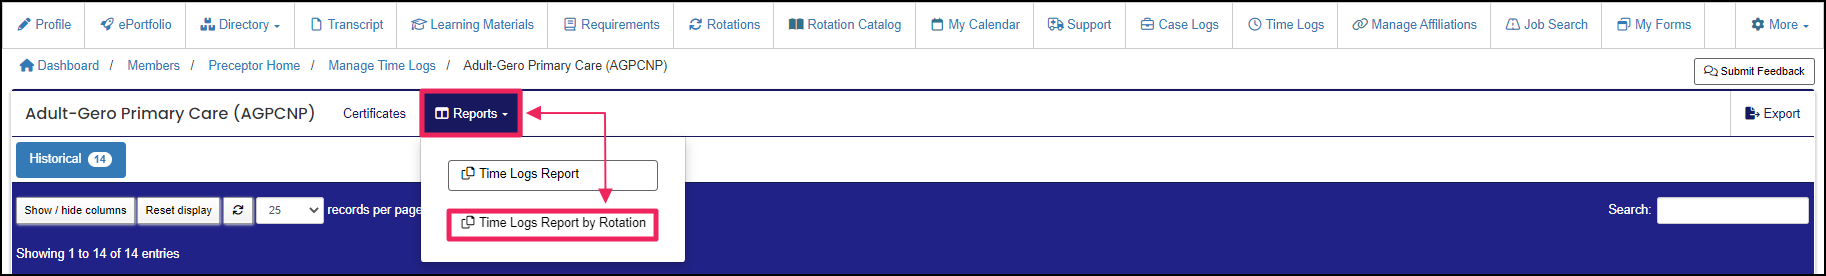 image screenshot filter options to Time Log Report by Rotation